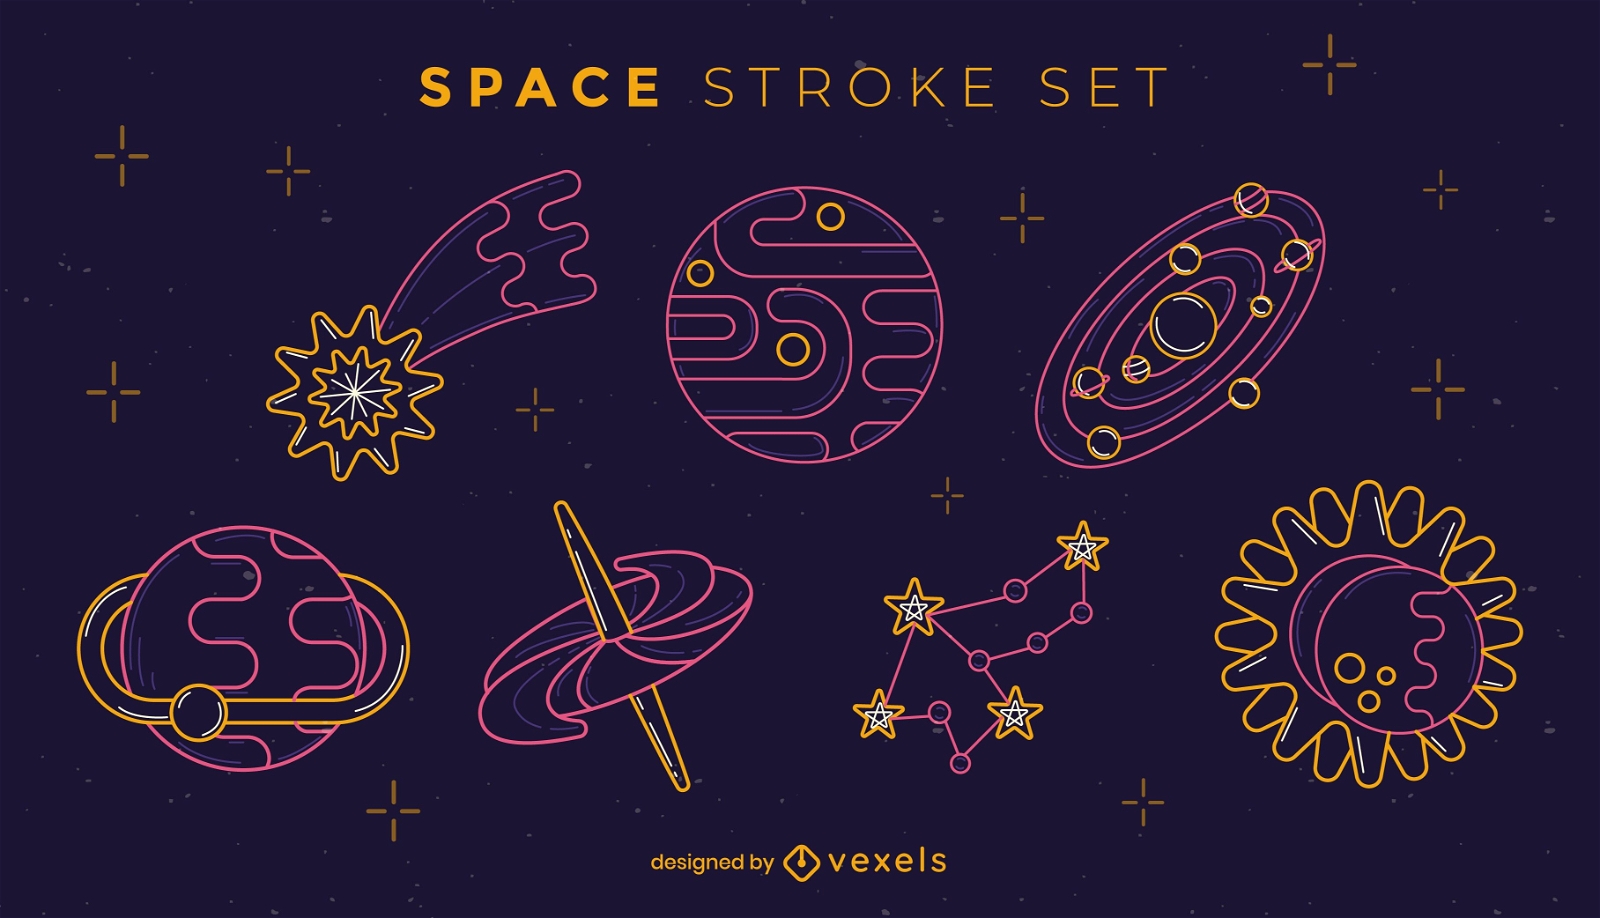 Stroke night colors themed space set